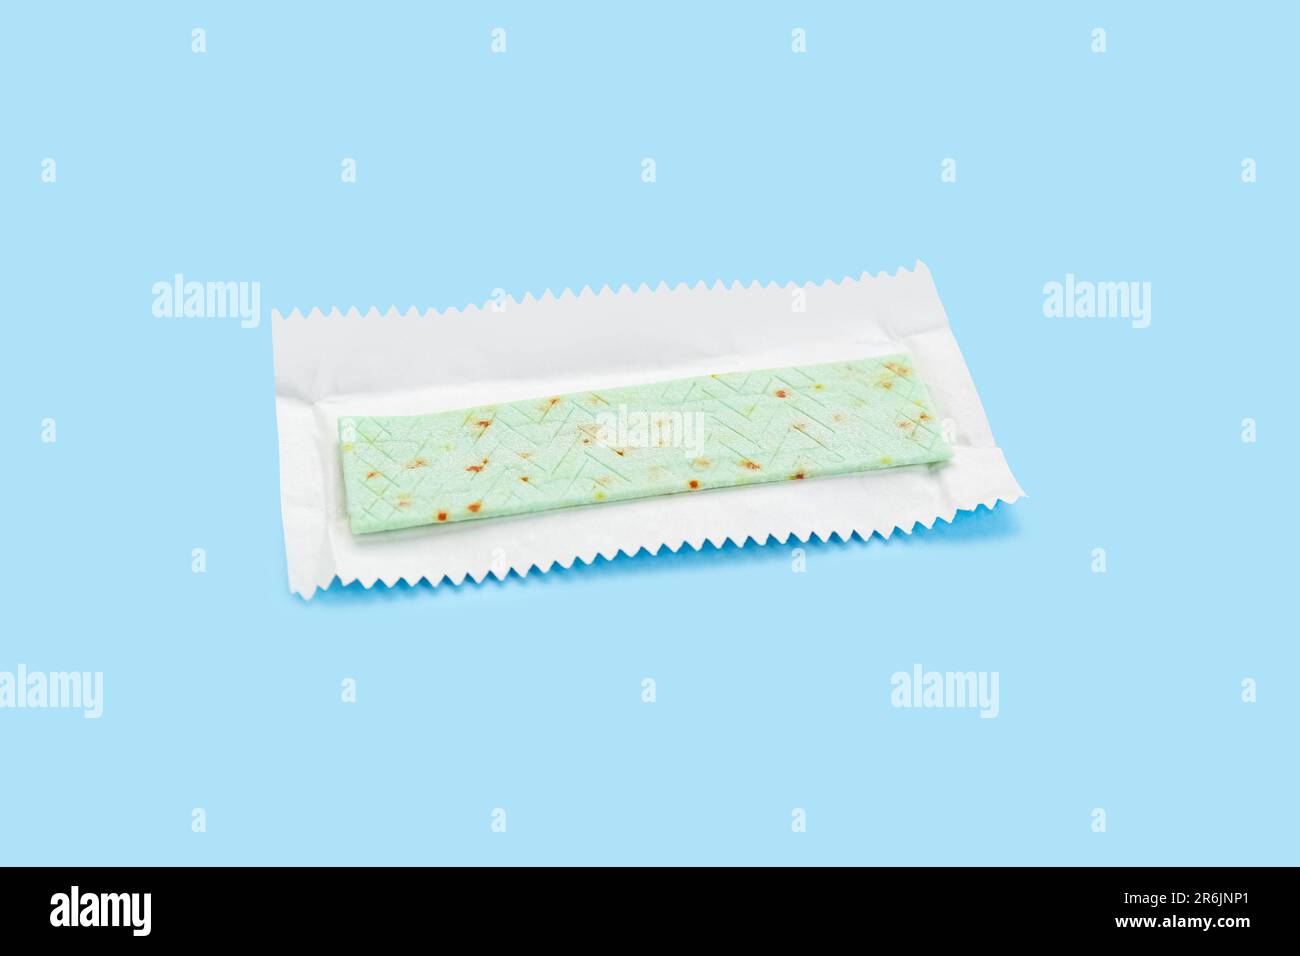 Unwrapped stick of chewing gum on light blue background Stock Photo